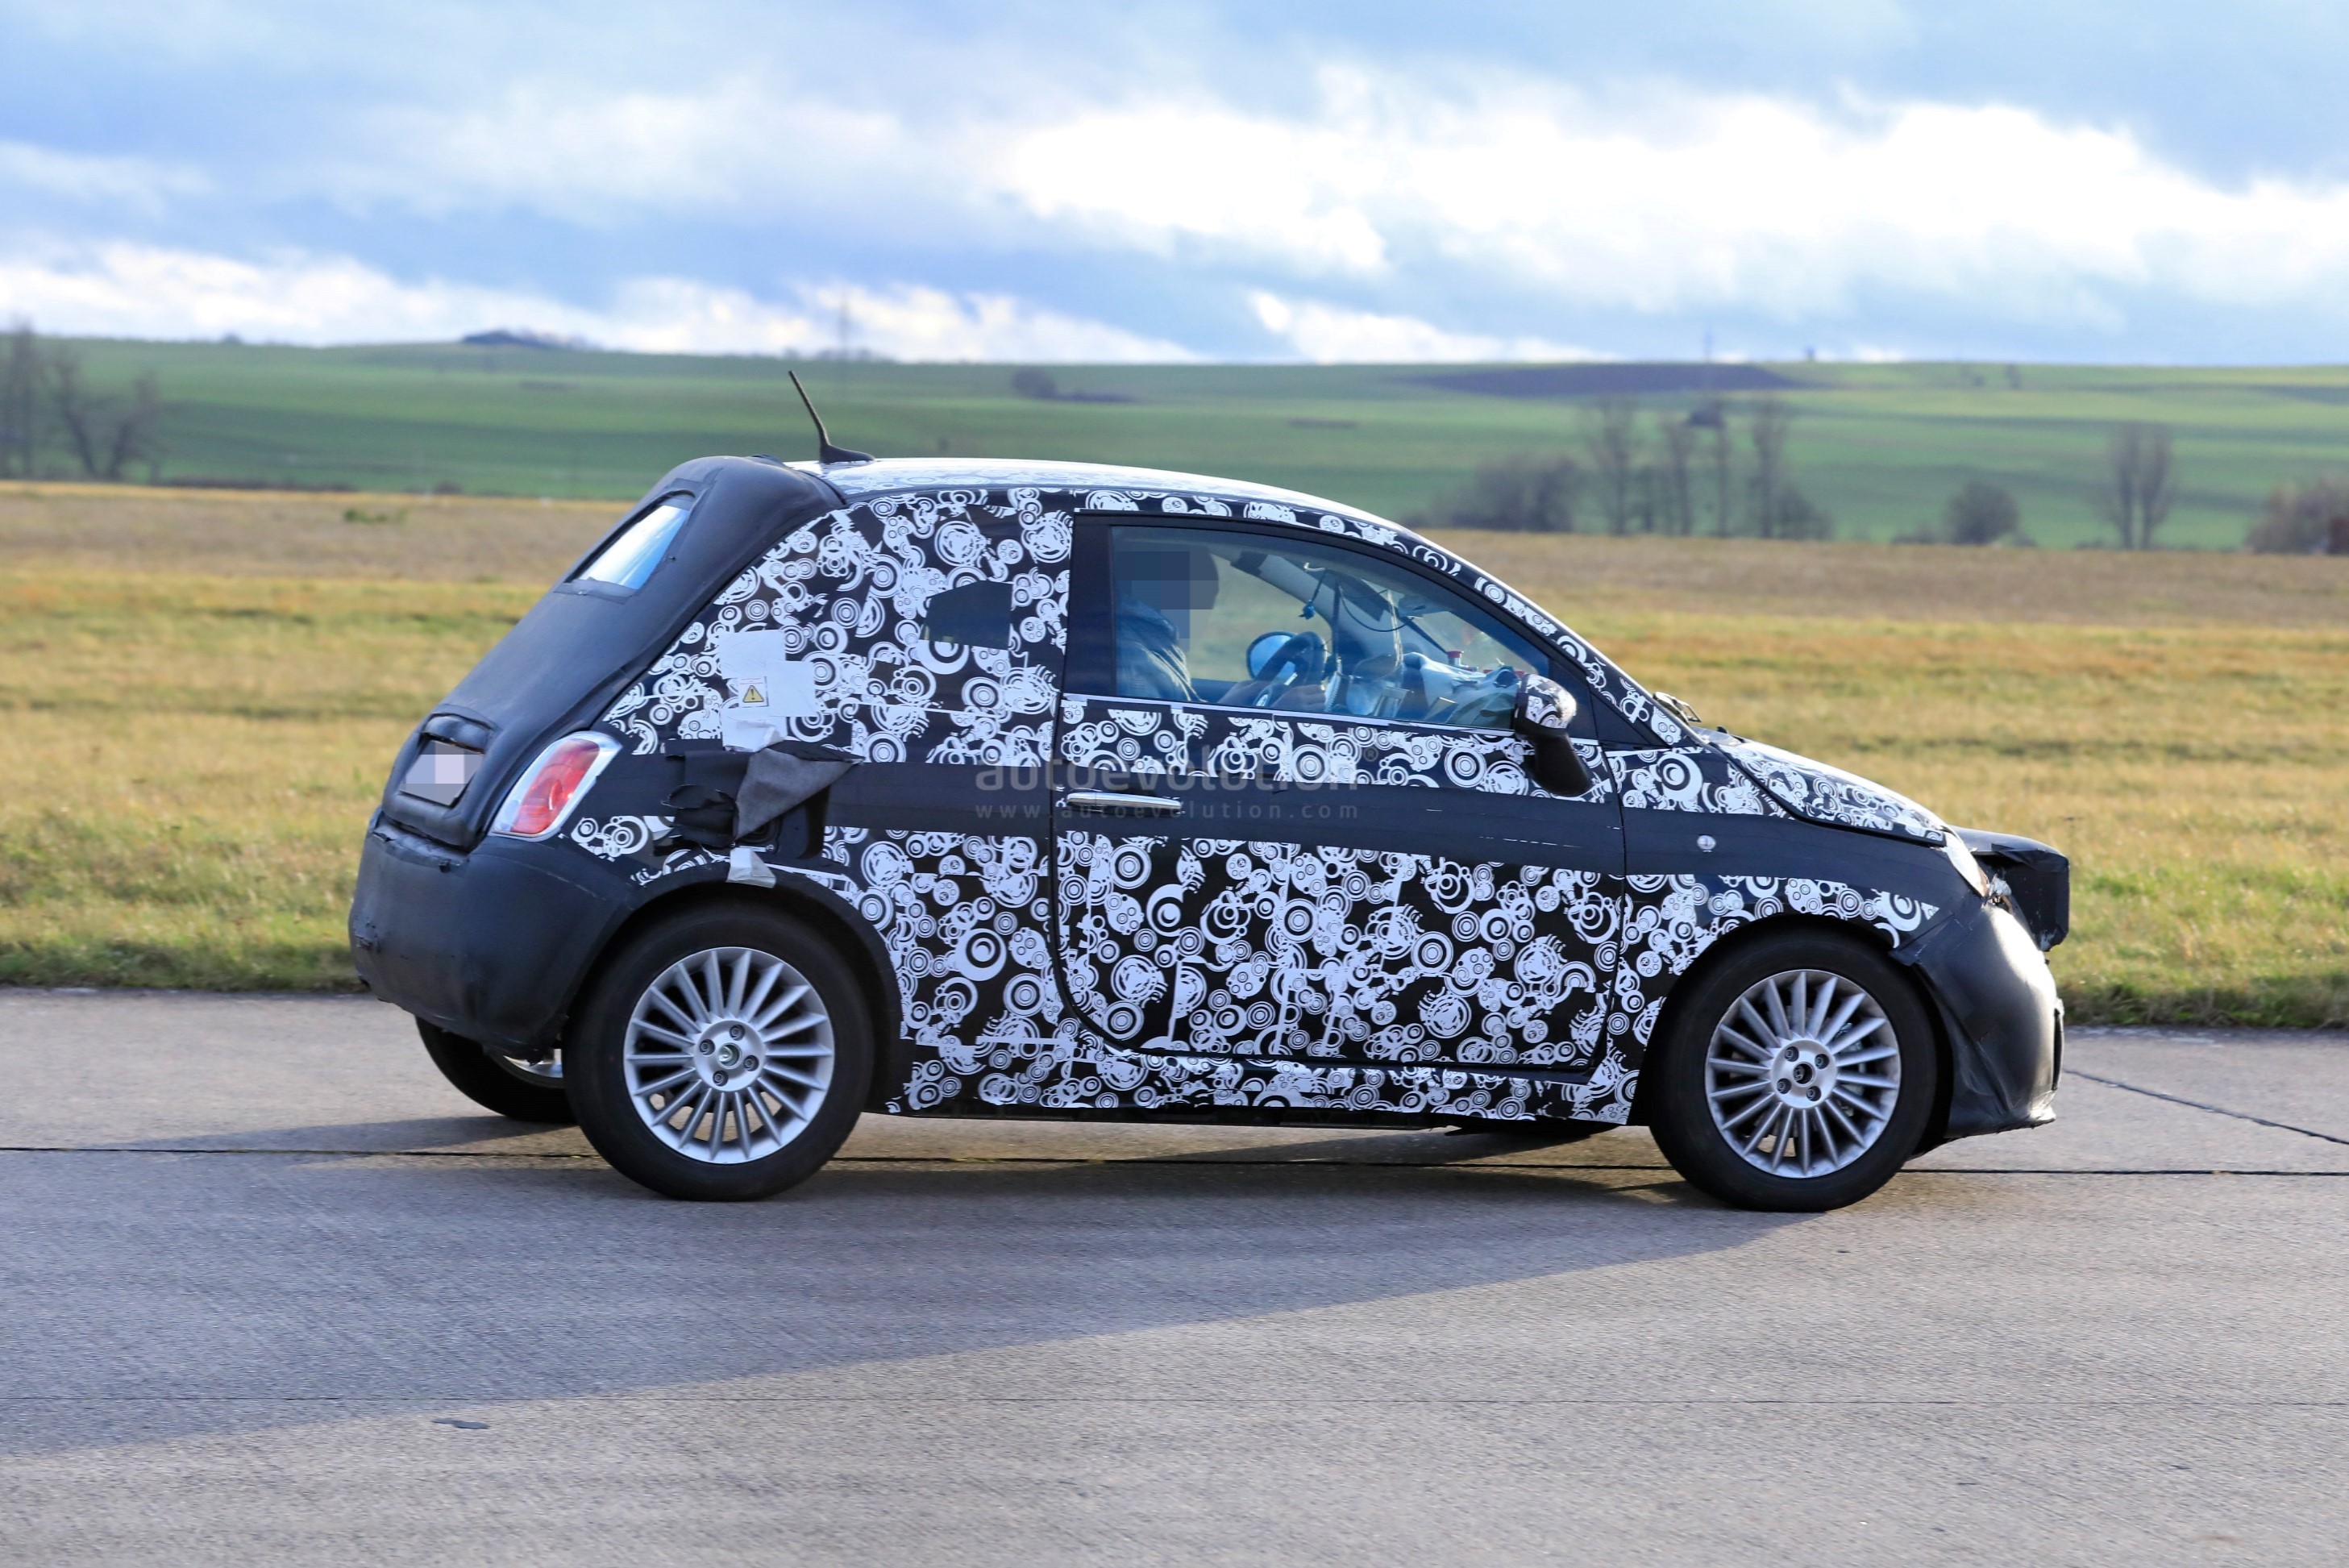 2021-fiat-500e-electric-car-spied-with-4wd-high-button-rotary-gear